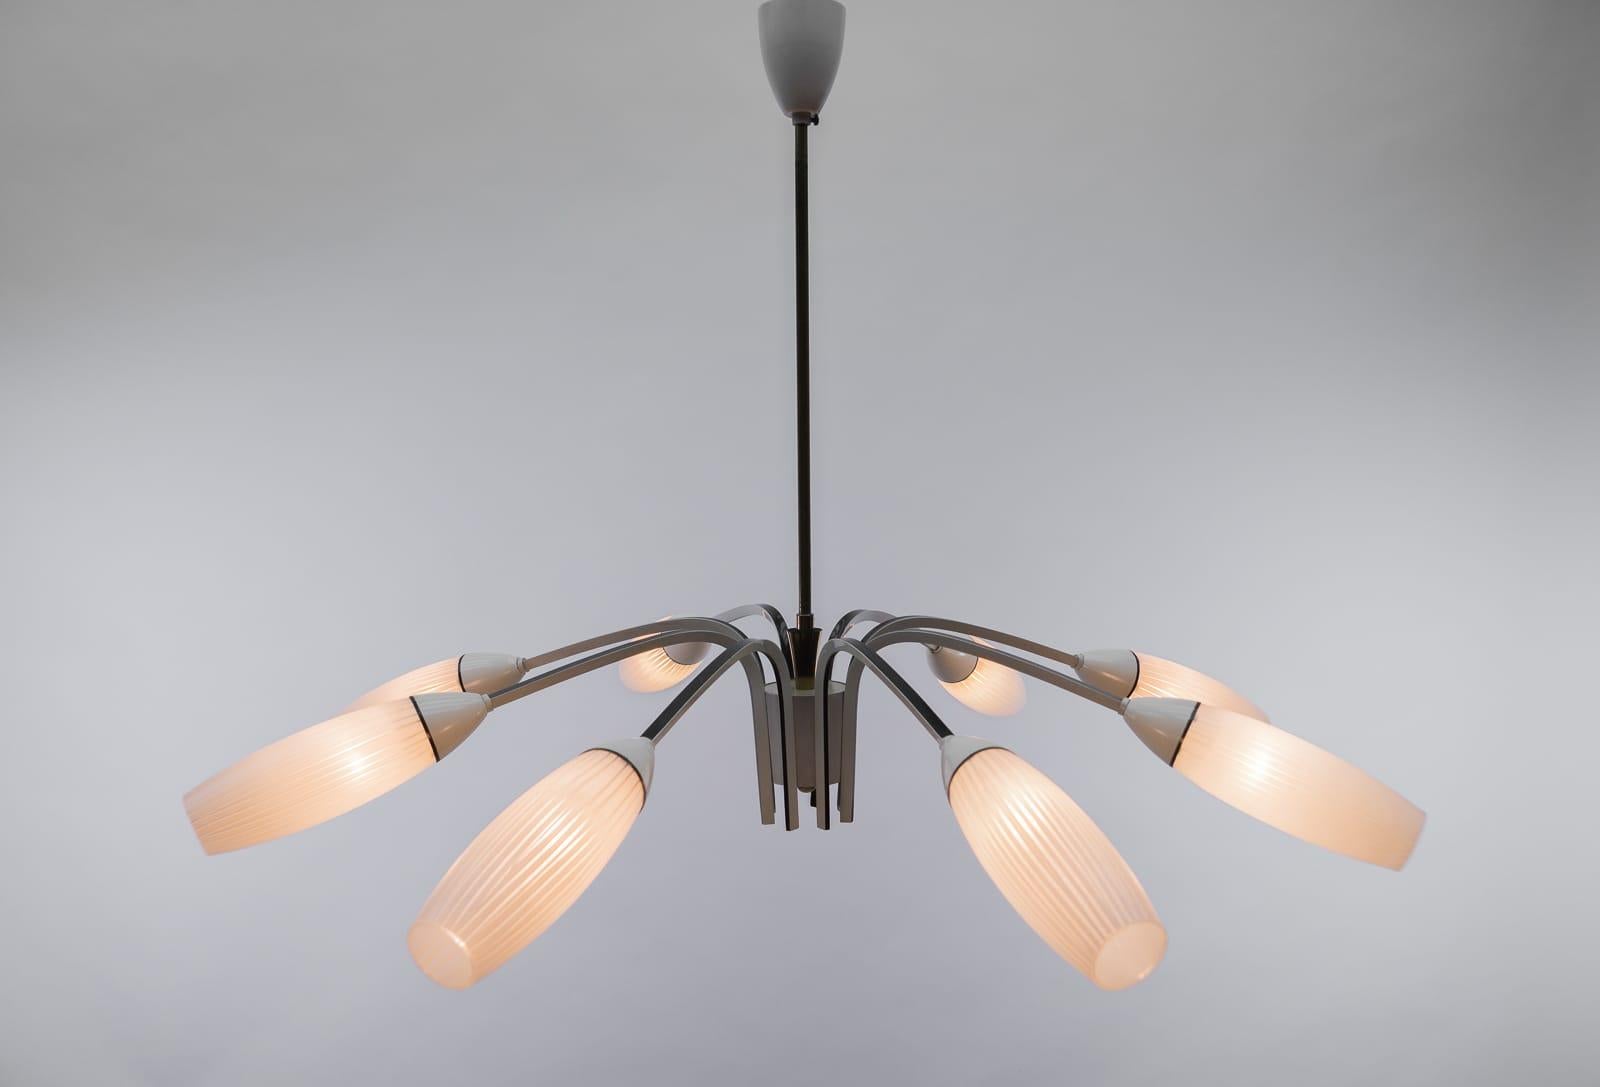 Mid-20th Century Ceiling 8-Light Sputnik Lamp in the Manner of Arteluce, Italy 1950s For Sale